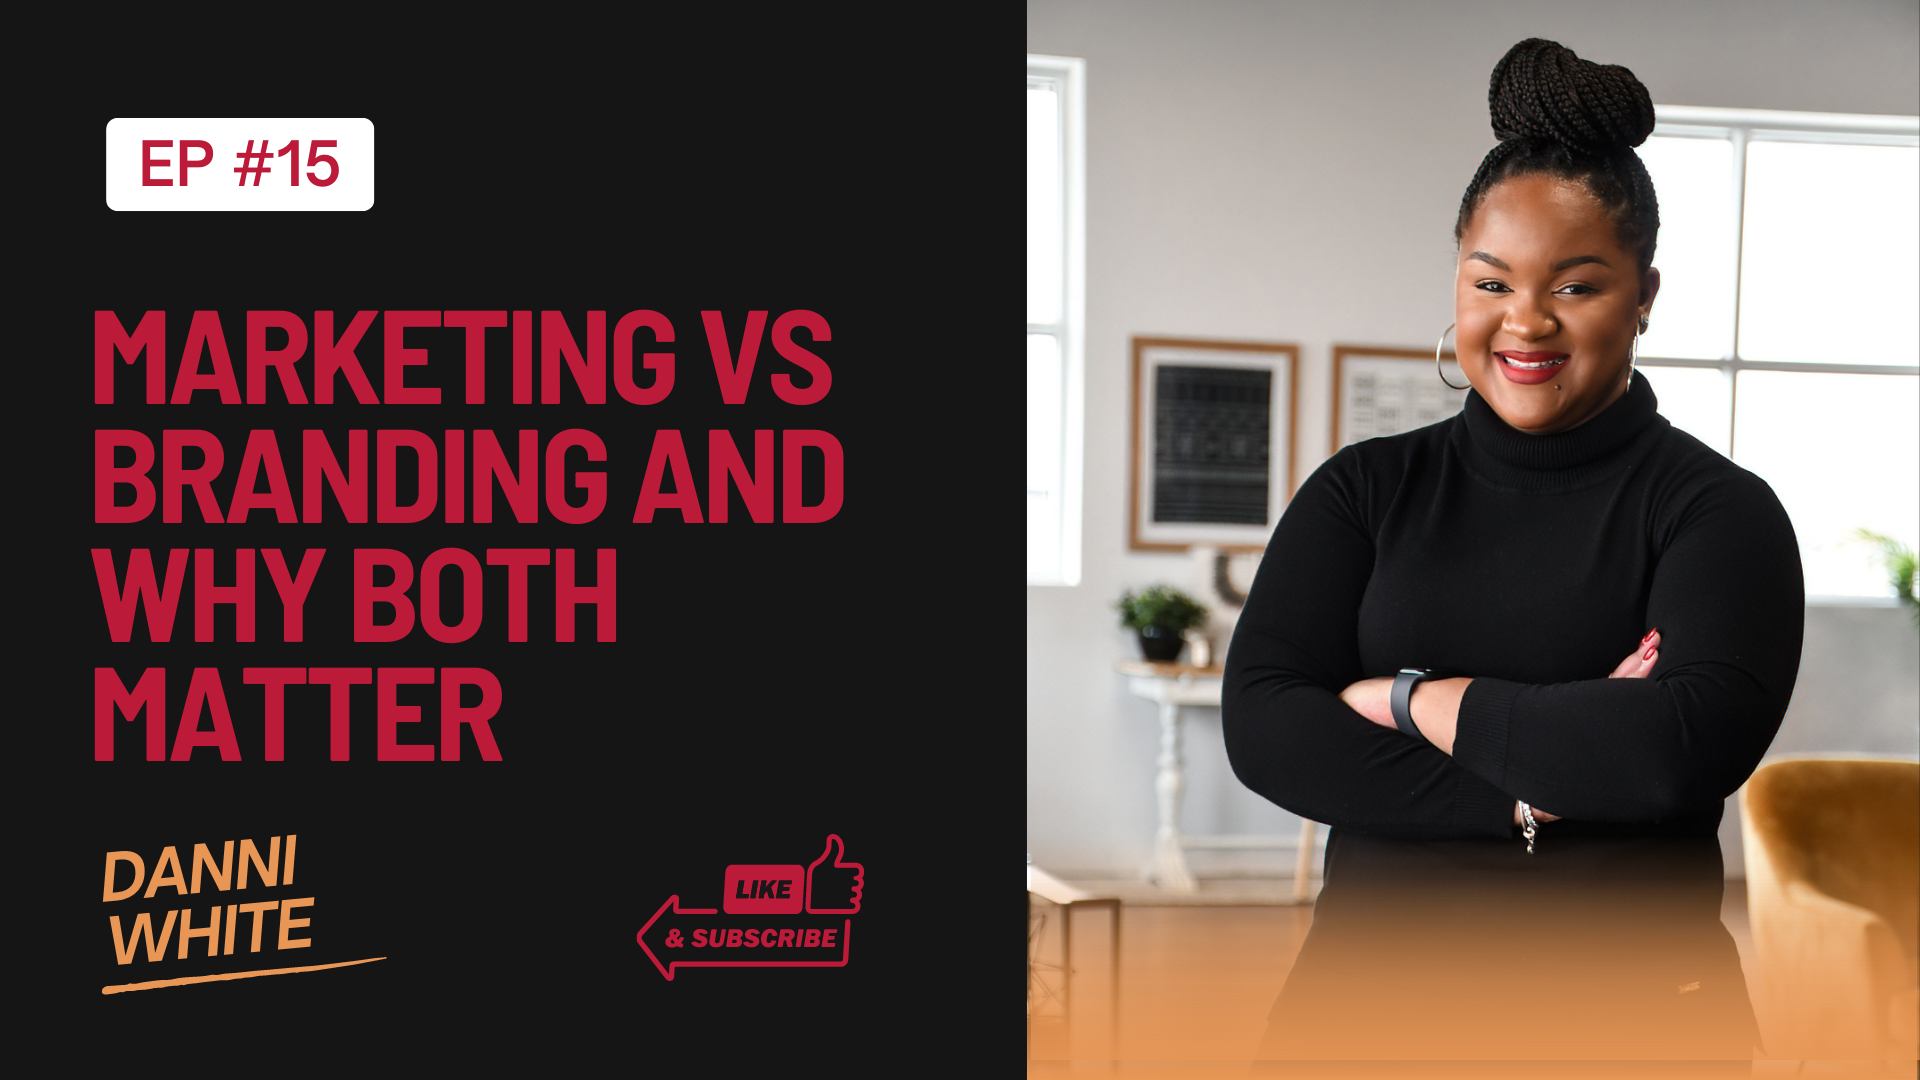 Episode 15: Marketing vs Branding and Why Both Matter